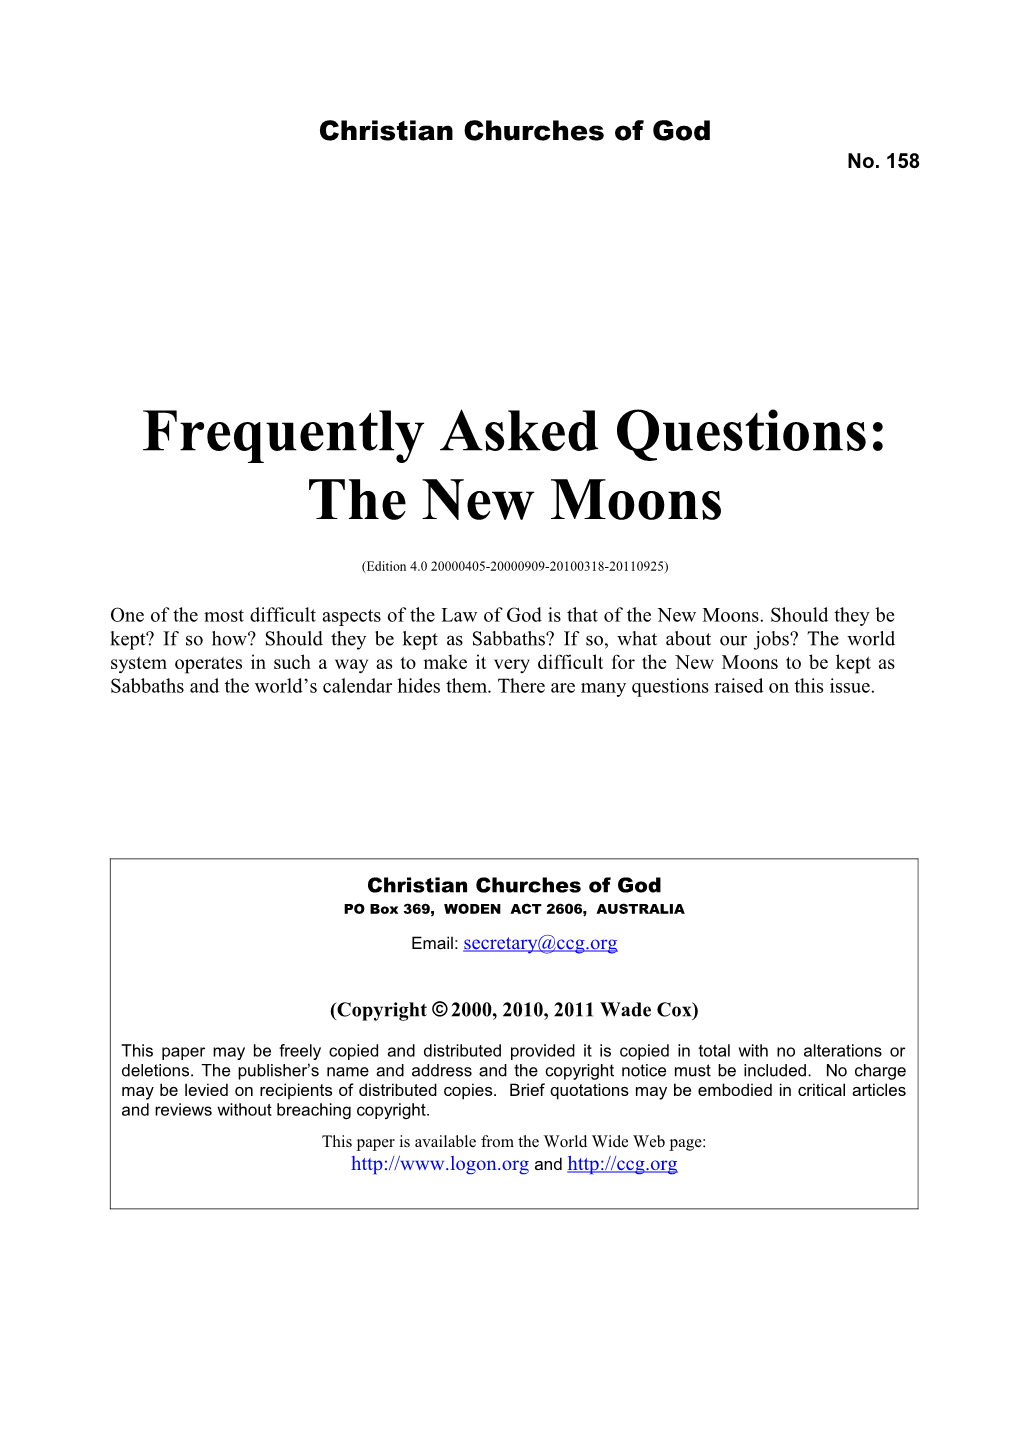 Frequently Asked Questions: the New Moons (No. 158)